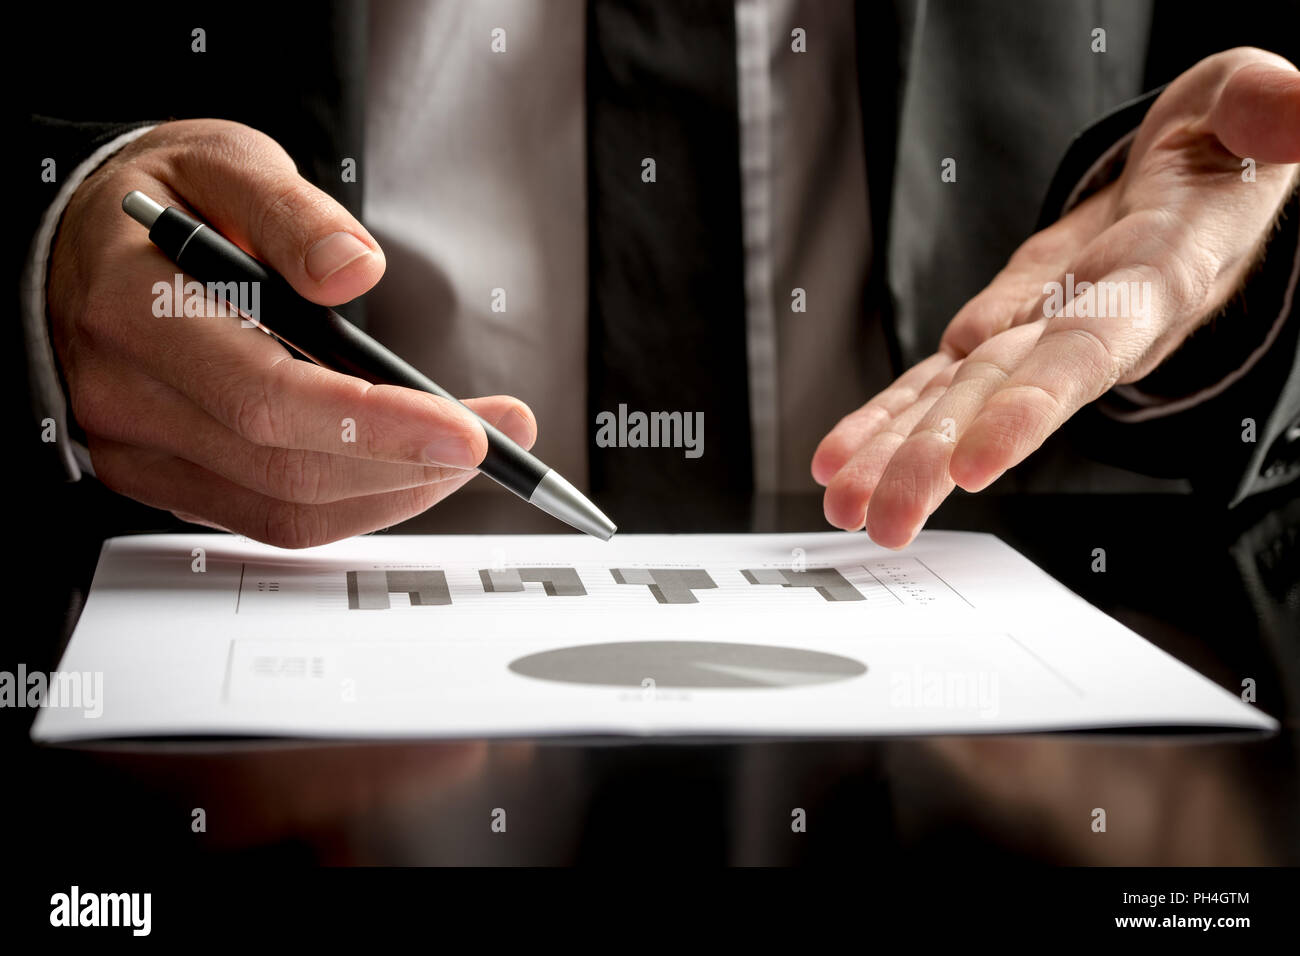 Businessman in a meeting or presentation holding a pen in one hand and pointing with the other to a document on the table in front of him, close up vi Stock Photo